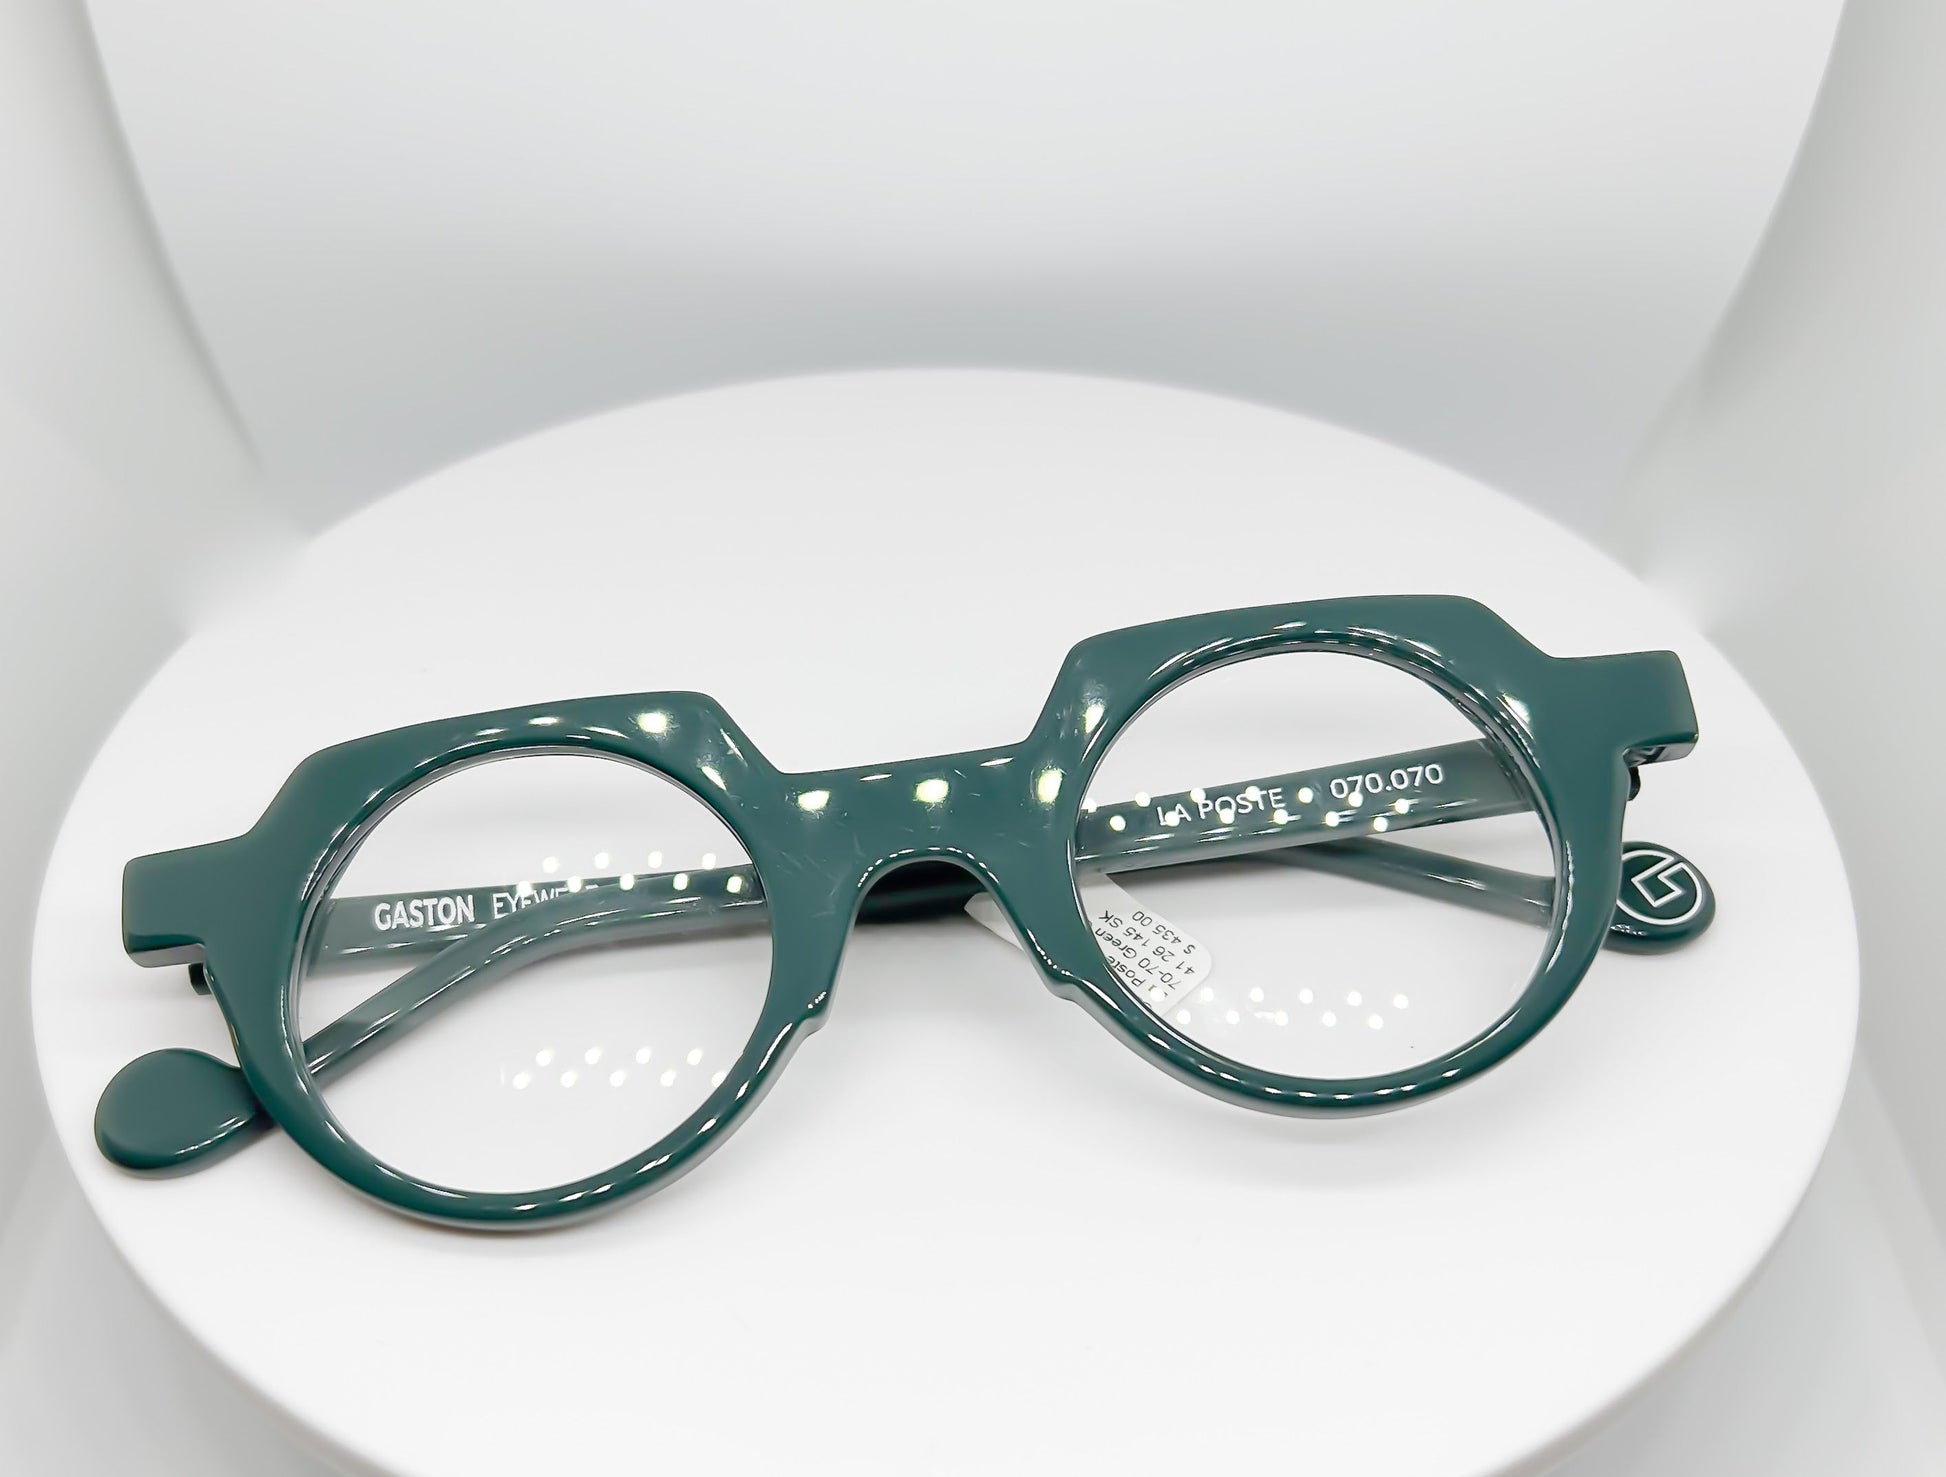 Buy Gaston Eyewear - La Poste, a  Green; Acetate Optical Frame with a Round with Flat Top shape. An Authorized Dealer, Adair Eyewear has a 40+ Years History of Customer Service Excellence